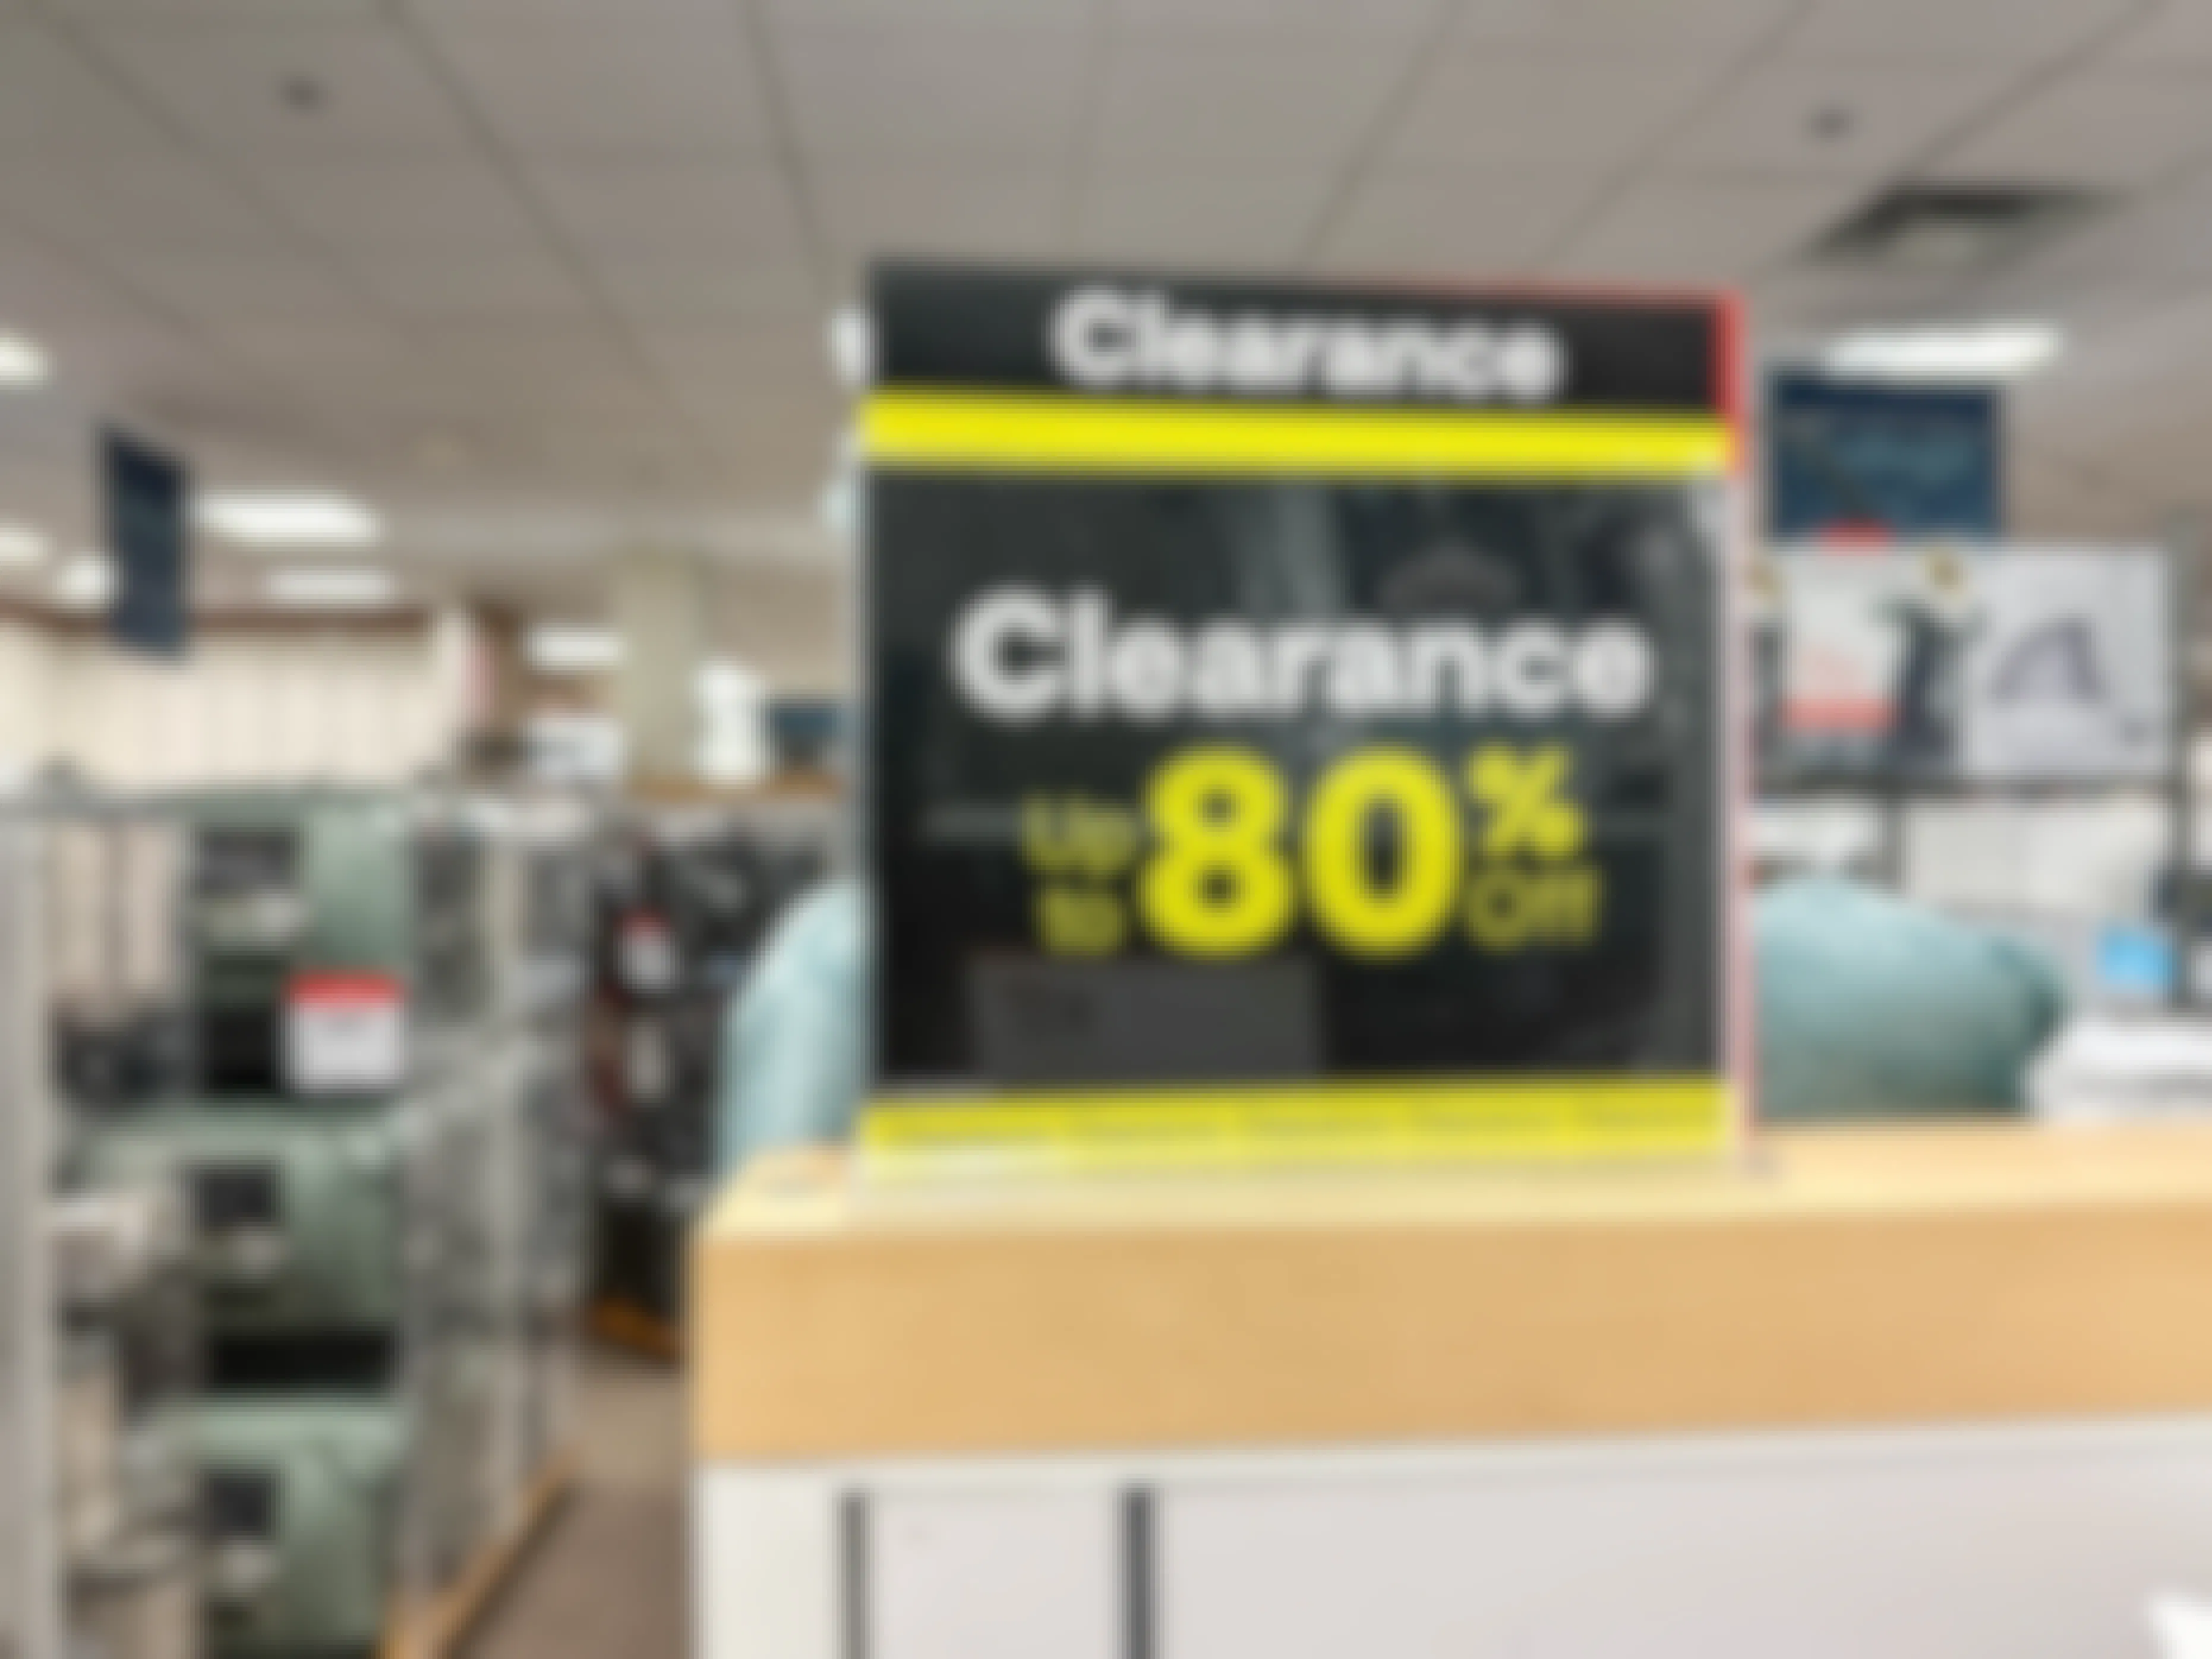 clearance sign with 80 percent off in jcpenneys store